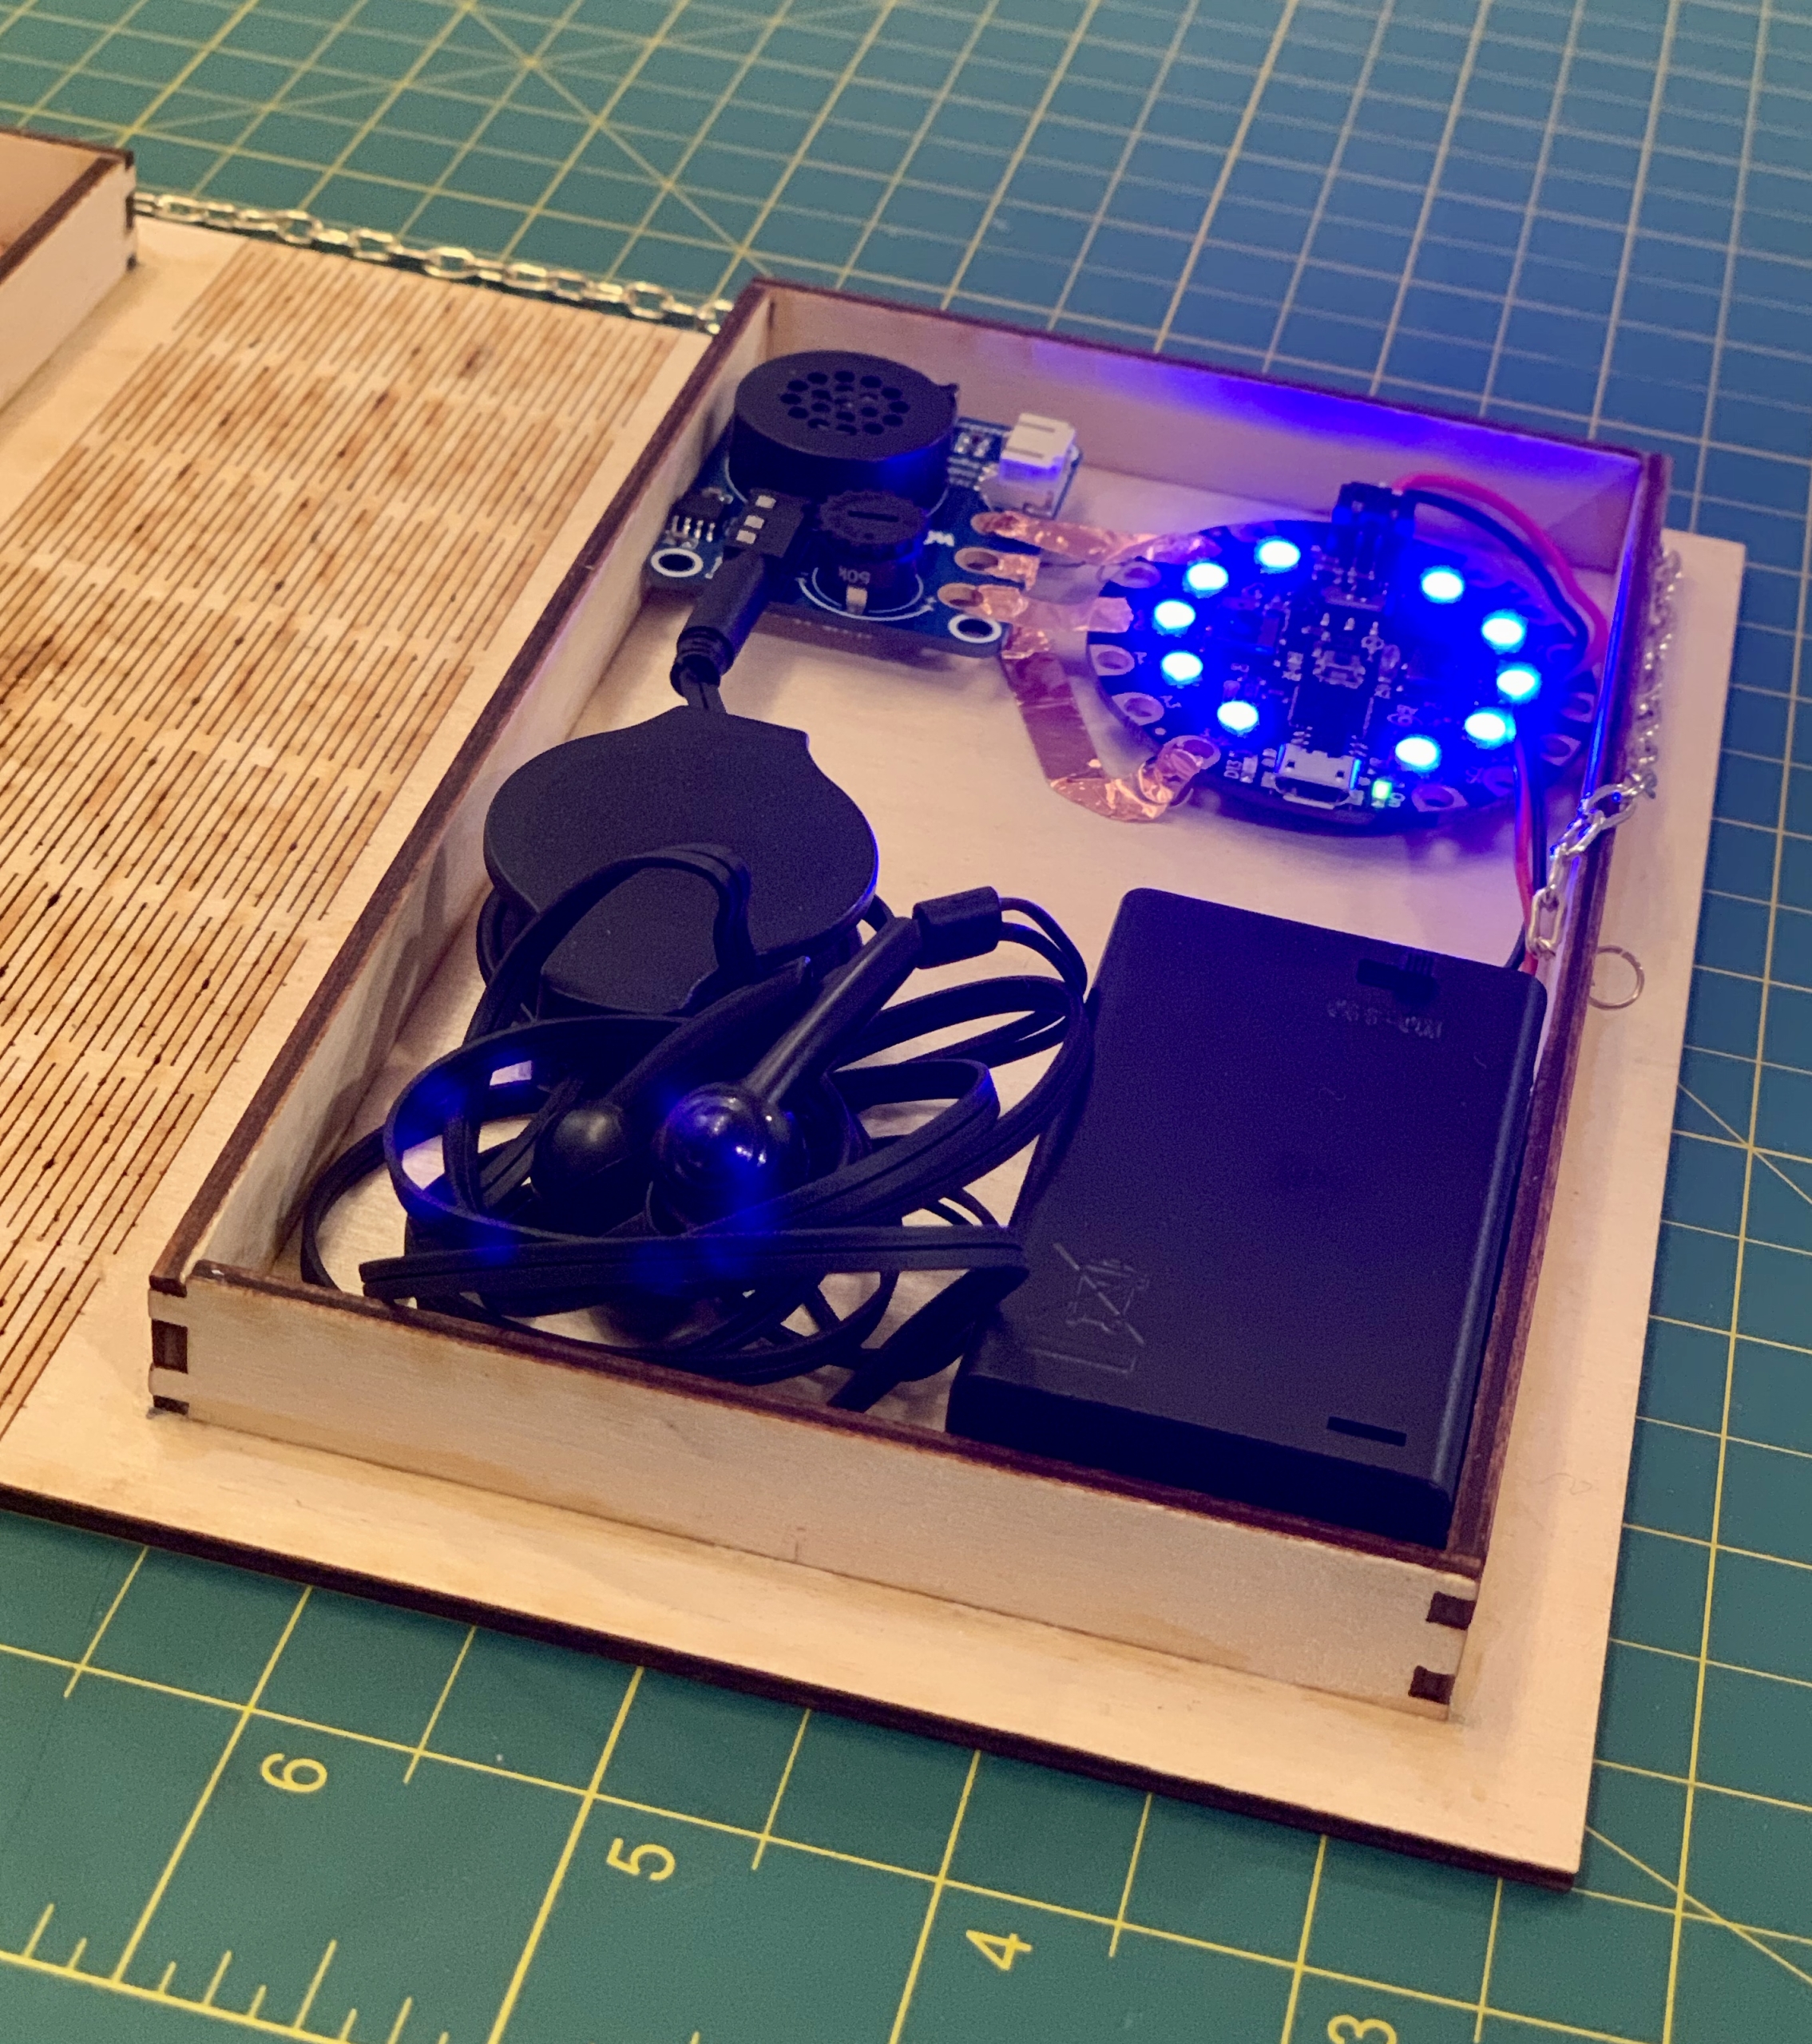 Detailed view of lit-up microcontroller with blue lights